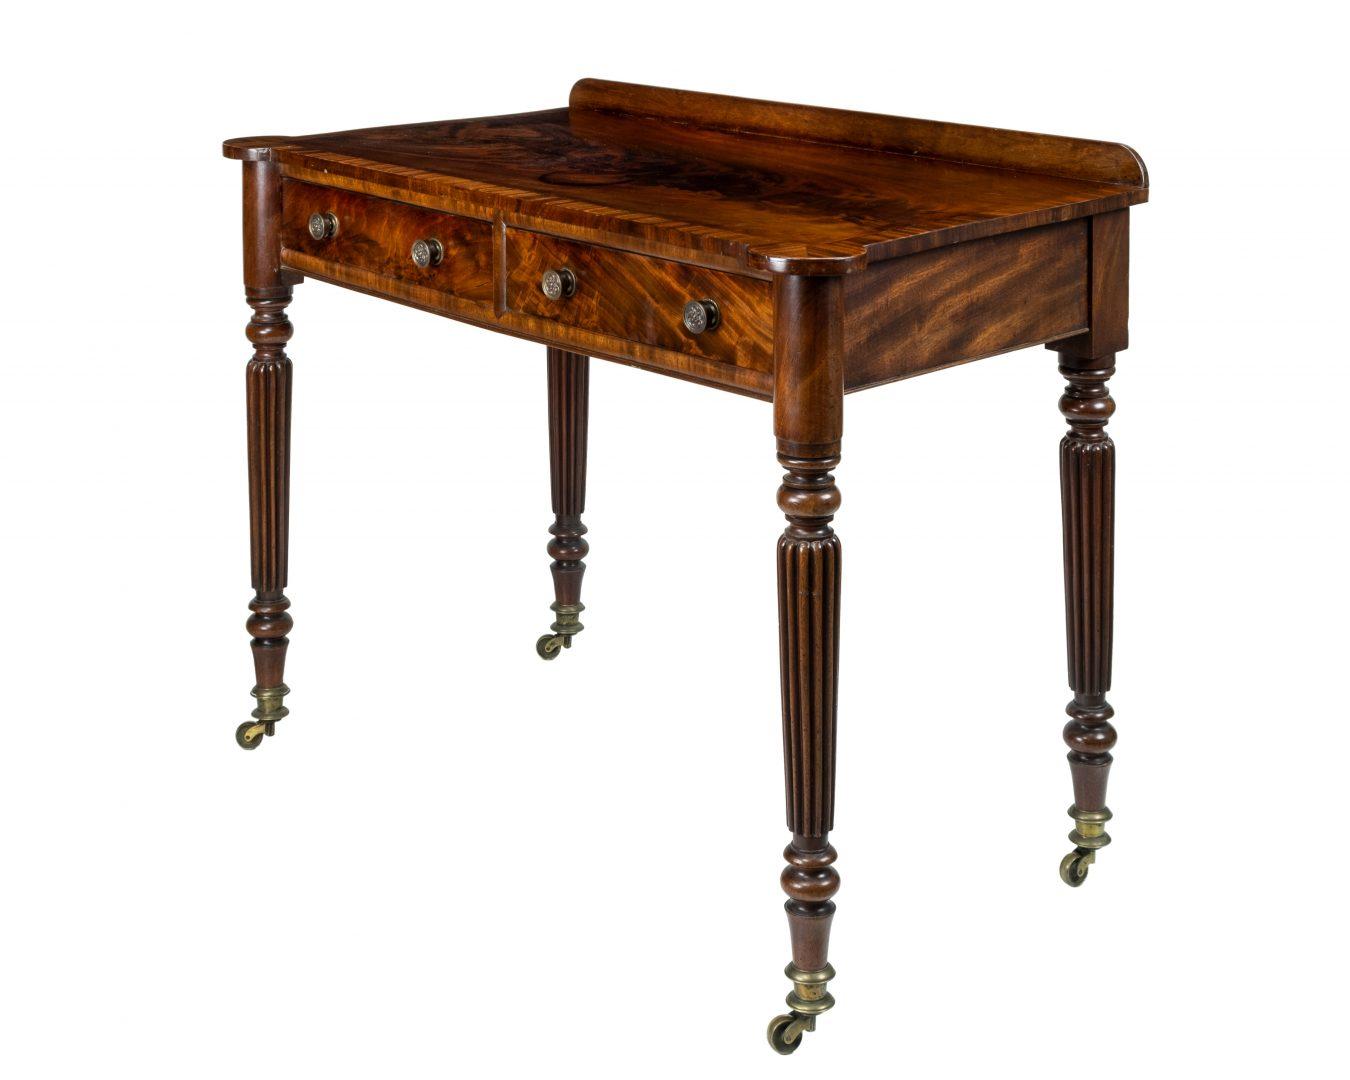 A 19th century figured mahogany side table attributed to Gillows, the cross banded top over two drawers on turned and reeeded tapering legs to brass caps and castors.

Gillows of Lancaster and London, also known as Gillow & Co., was an English